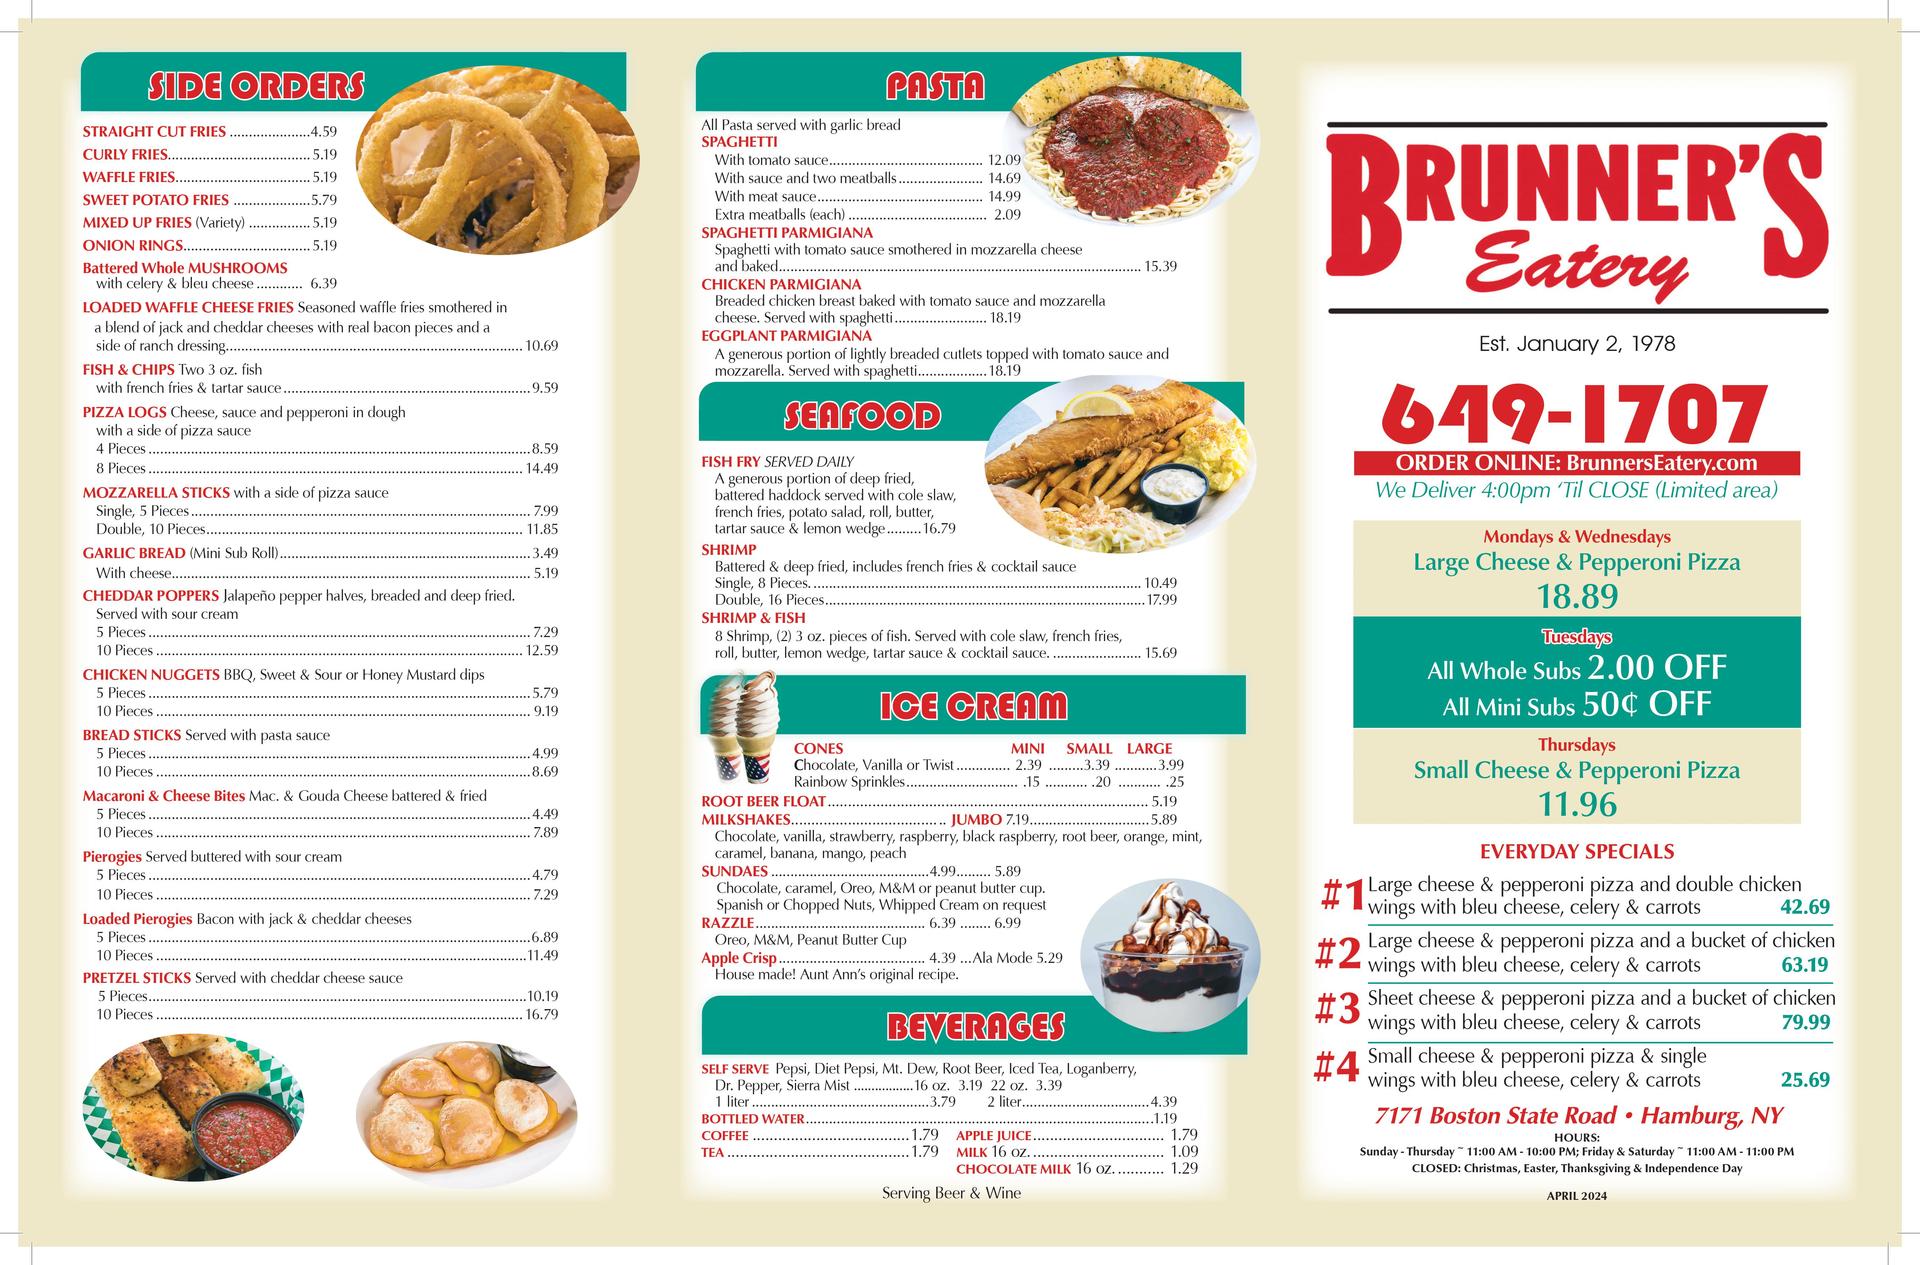 Brunner's Eatery Menu Page 1